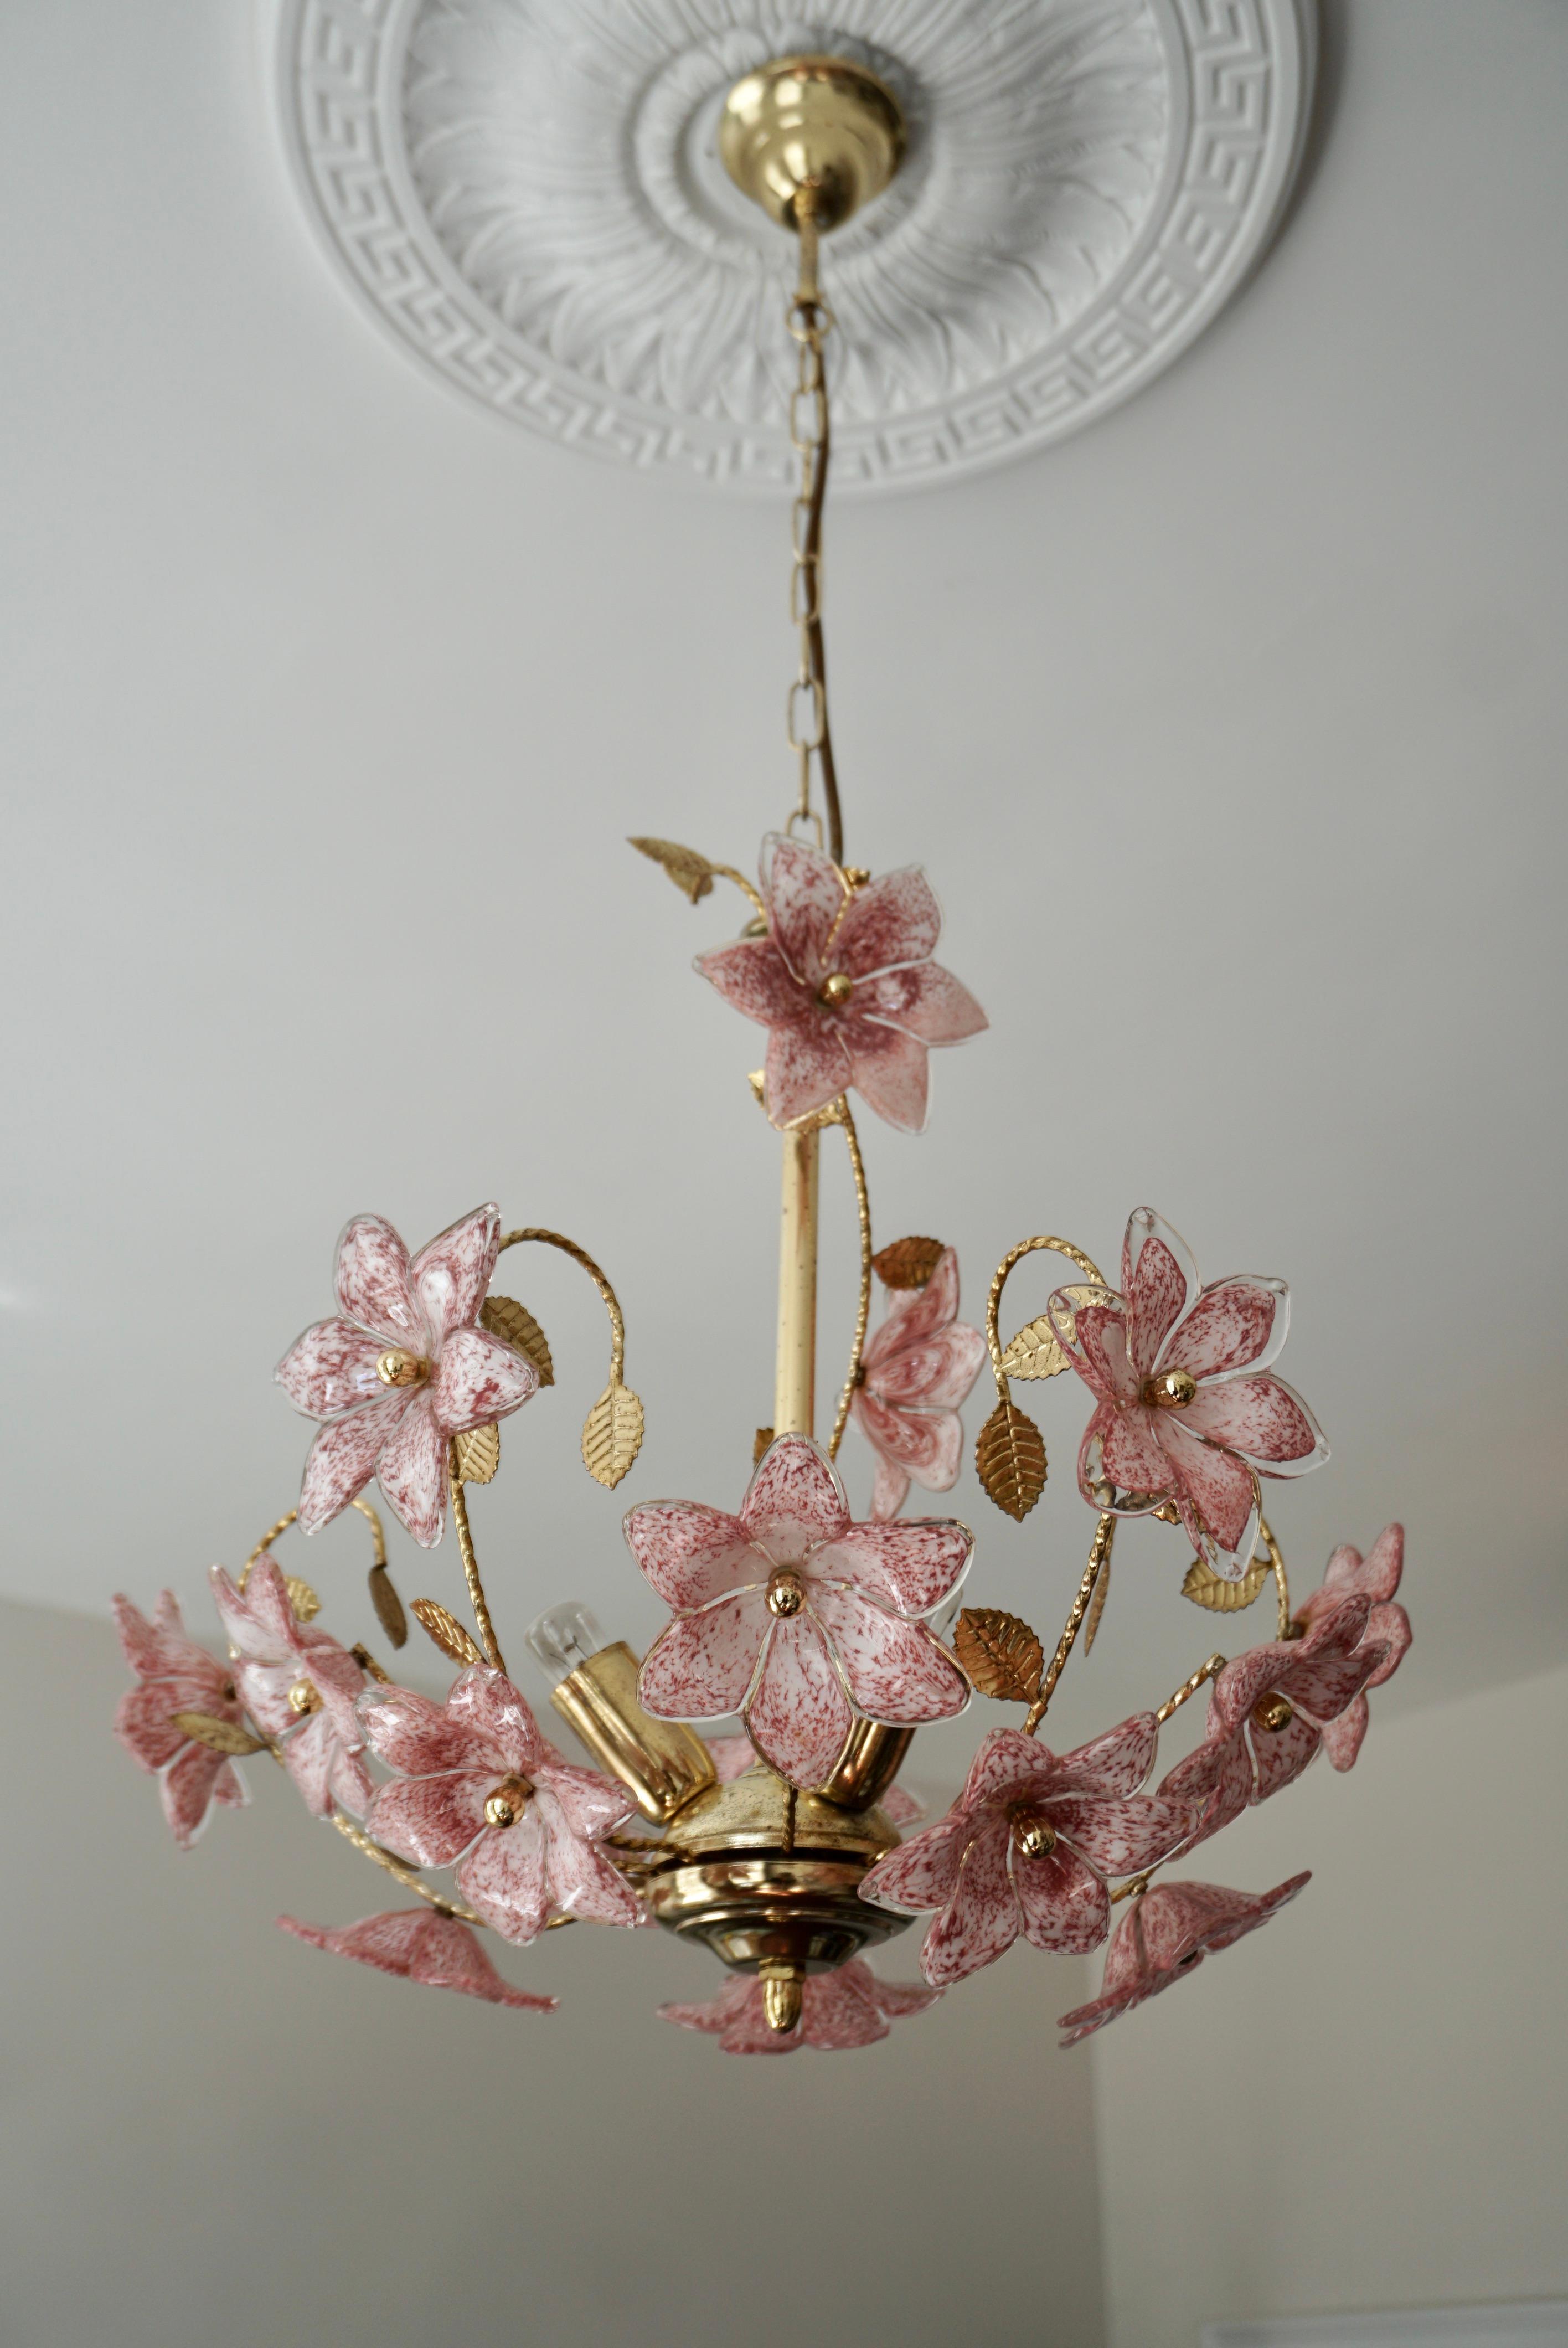 Vintage Murano glass chandelier with pink flowers.

Diameter 18.1